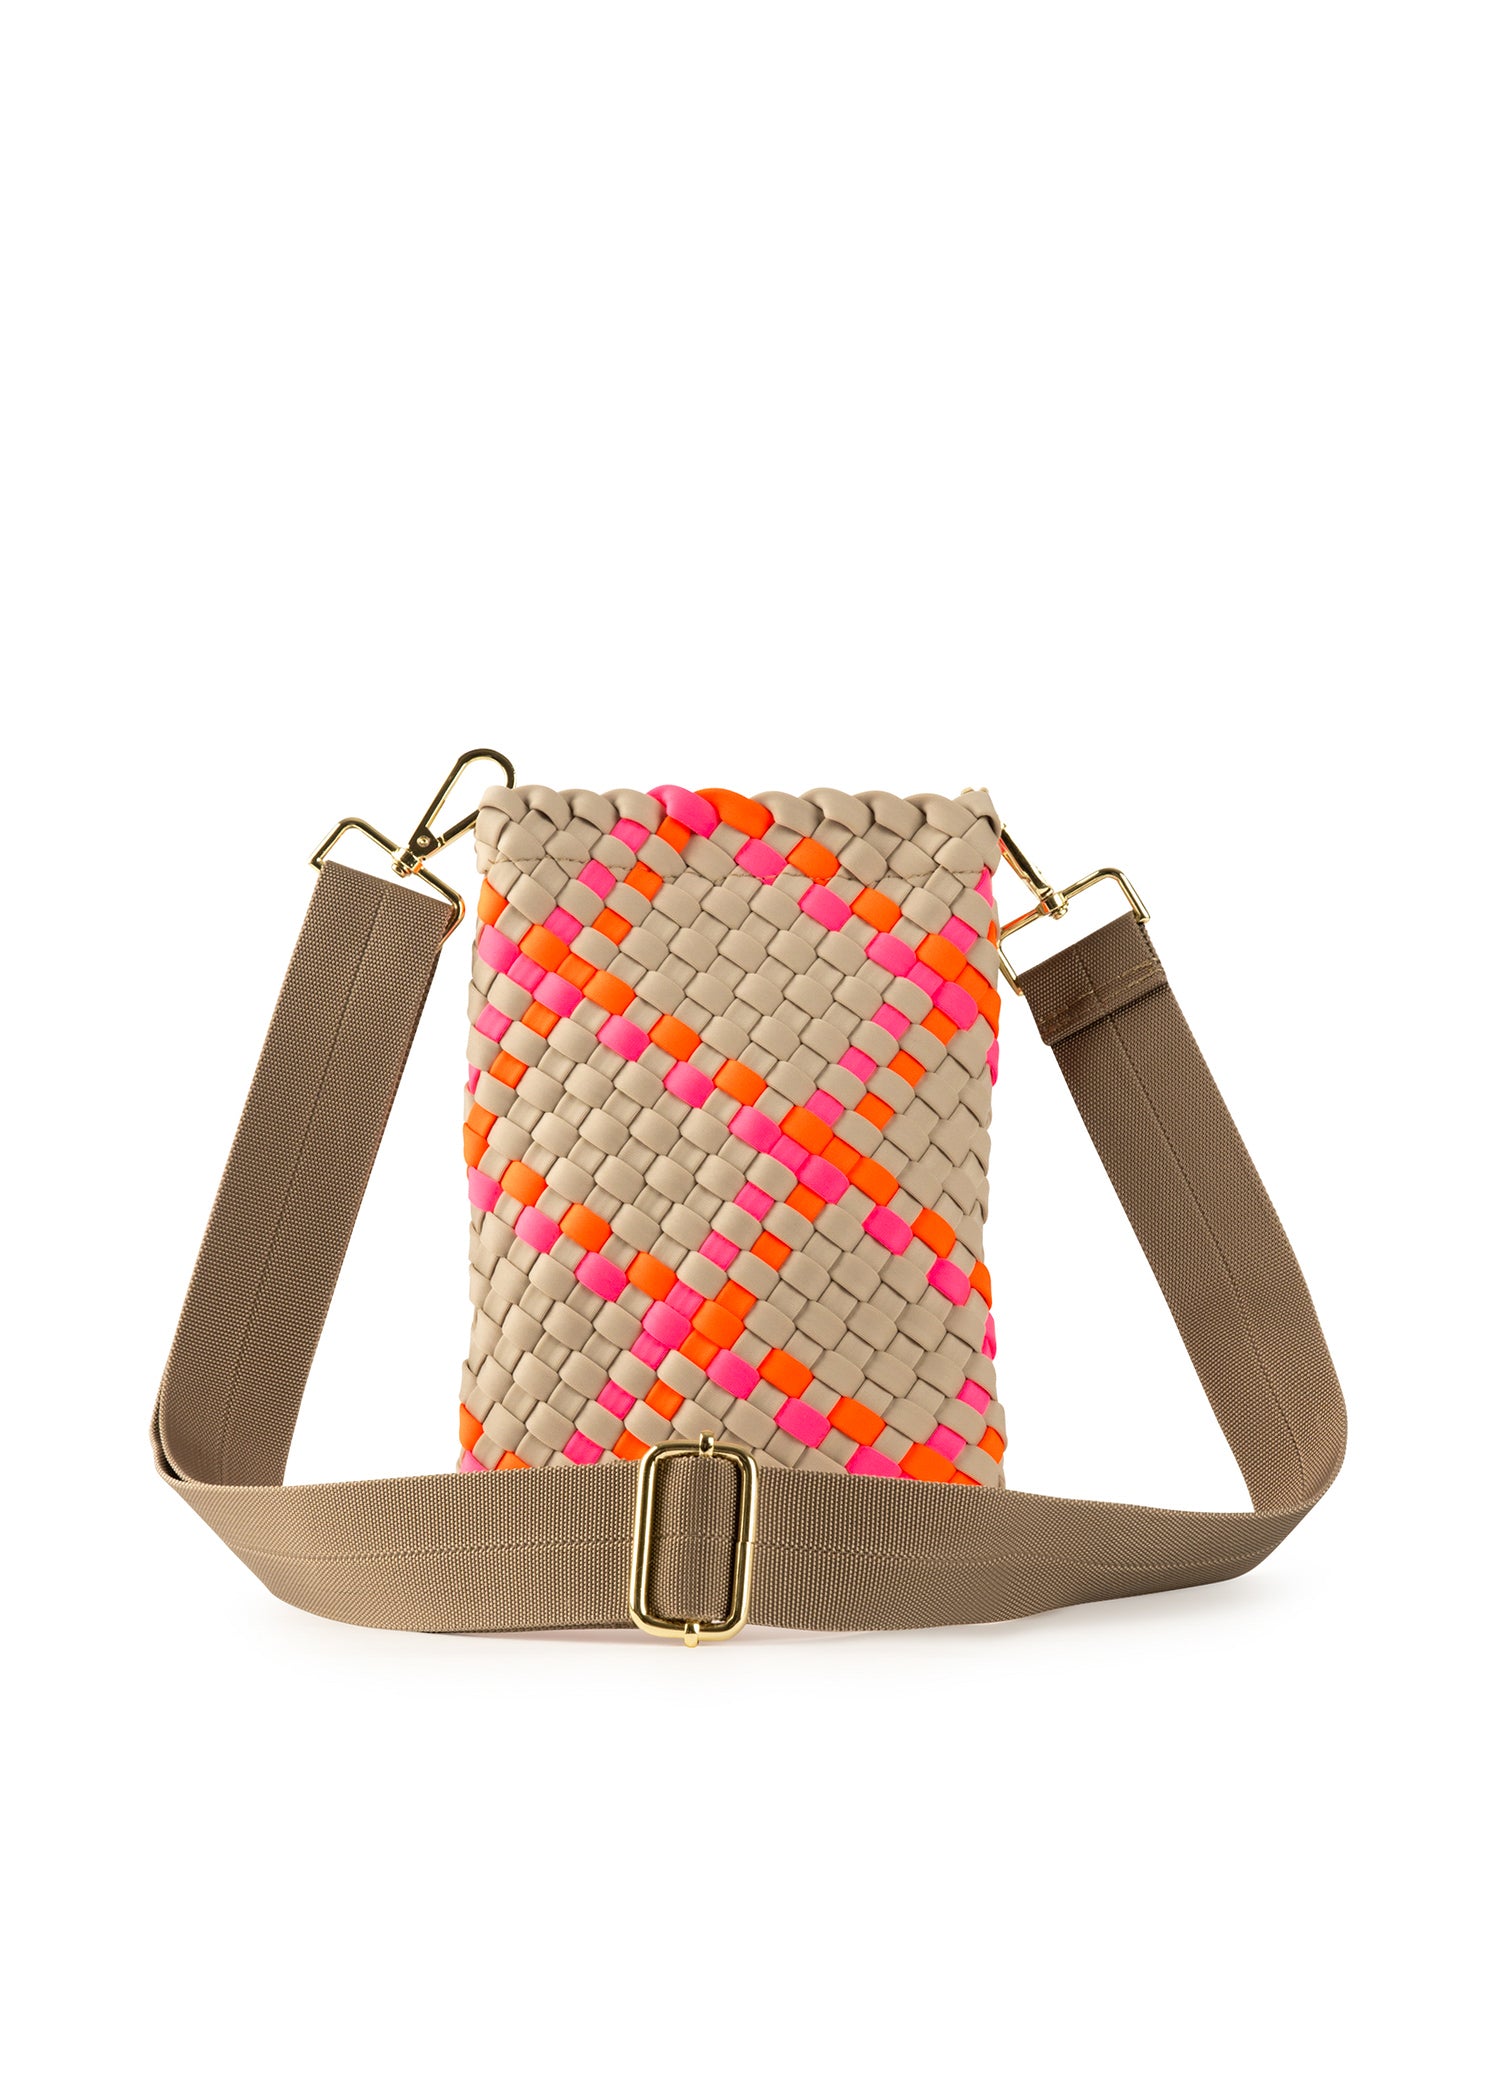 Shay Belize Woven Phone Bag